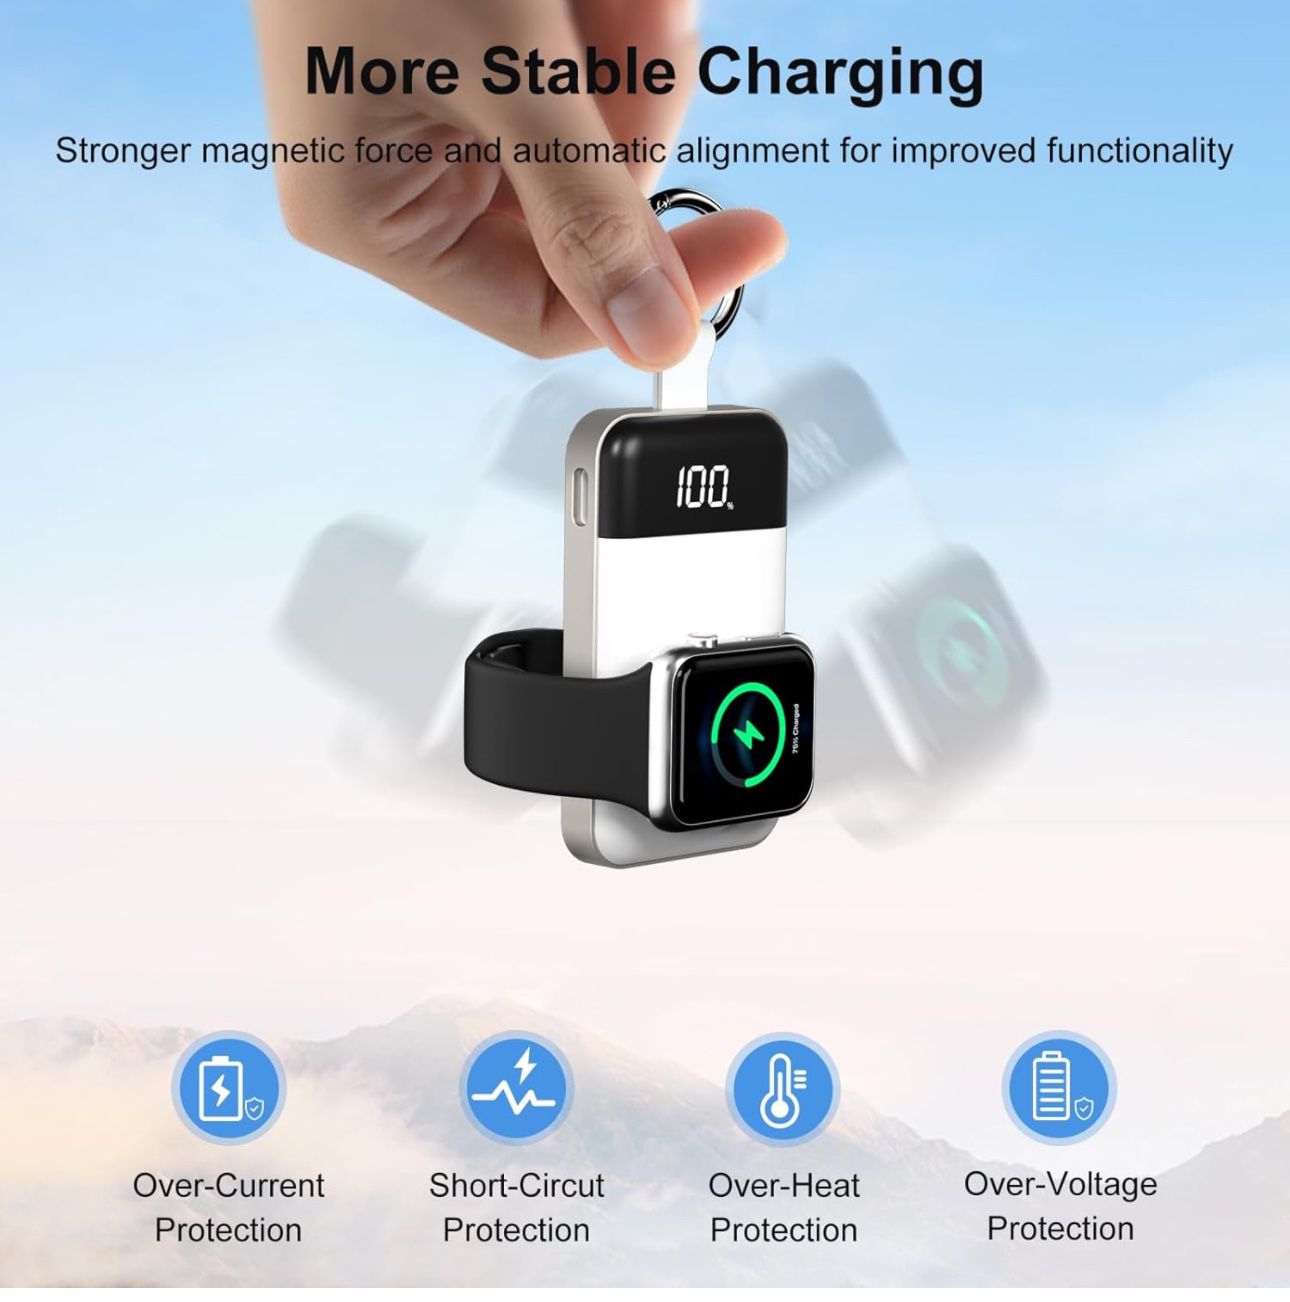 Portable Wireless Charger Compatible for Apple Watch,2000mAh Magnetic iWatch Charger Power Bank Keychain Travel Accessories LED Display for Apple Watc